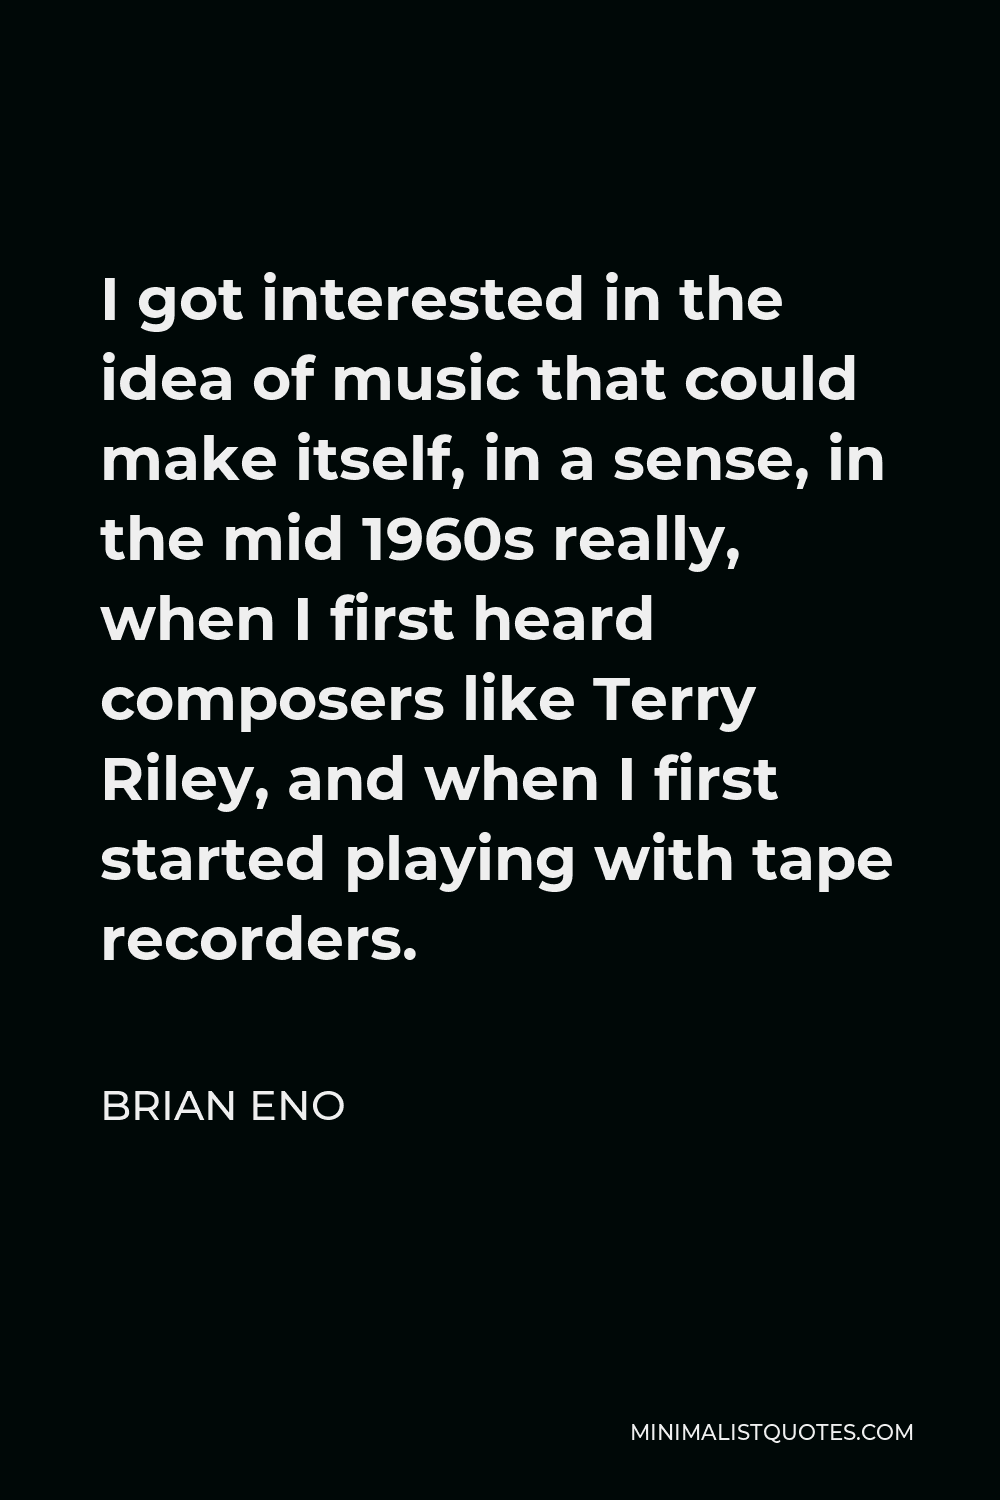 Brian Eno Quote - I got interested in the idea of music that could make itself, in a sense, in the mid 1960s really, when I first heard composers like Terry Riley, and when I first started playing with tape recorders.